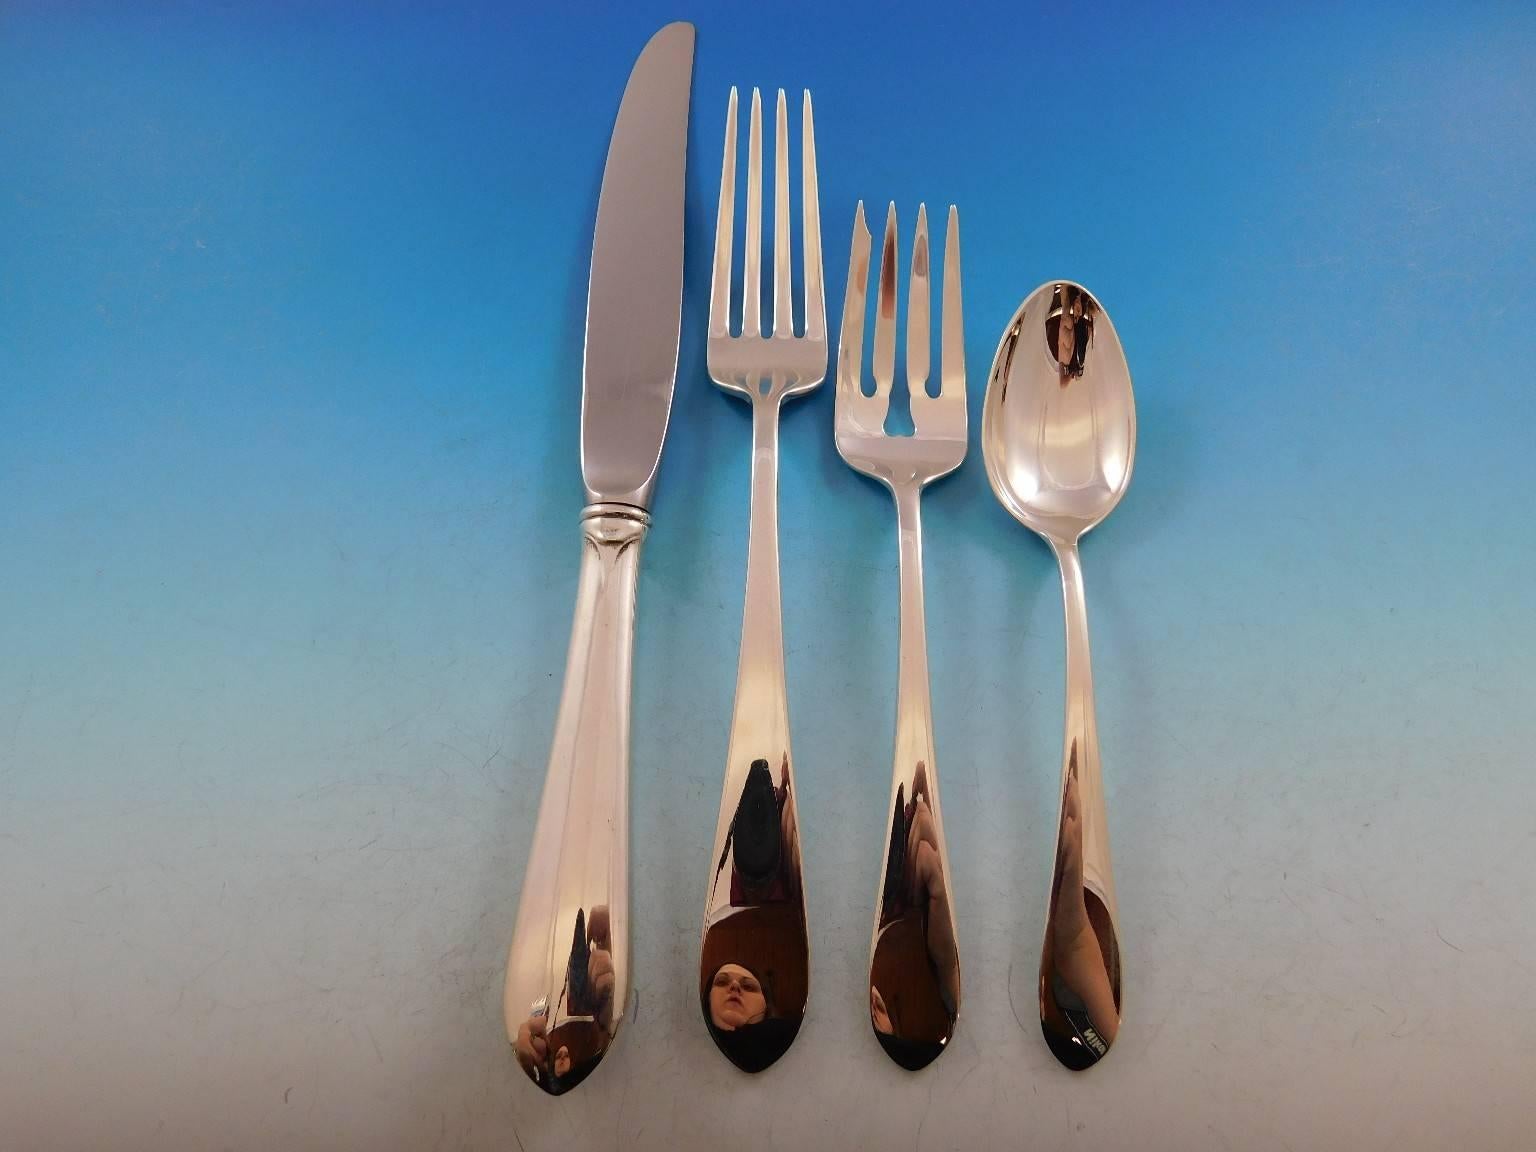 Monumental dinner and luncheon puritan by Gorham sterling silver flatware set - 96 pieces. This set includes:

12 dinner size knives, 9 3/4